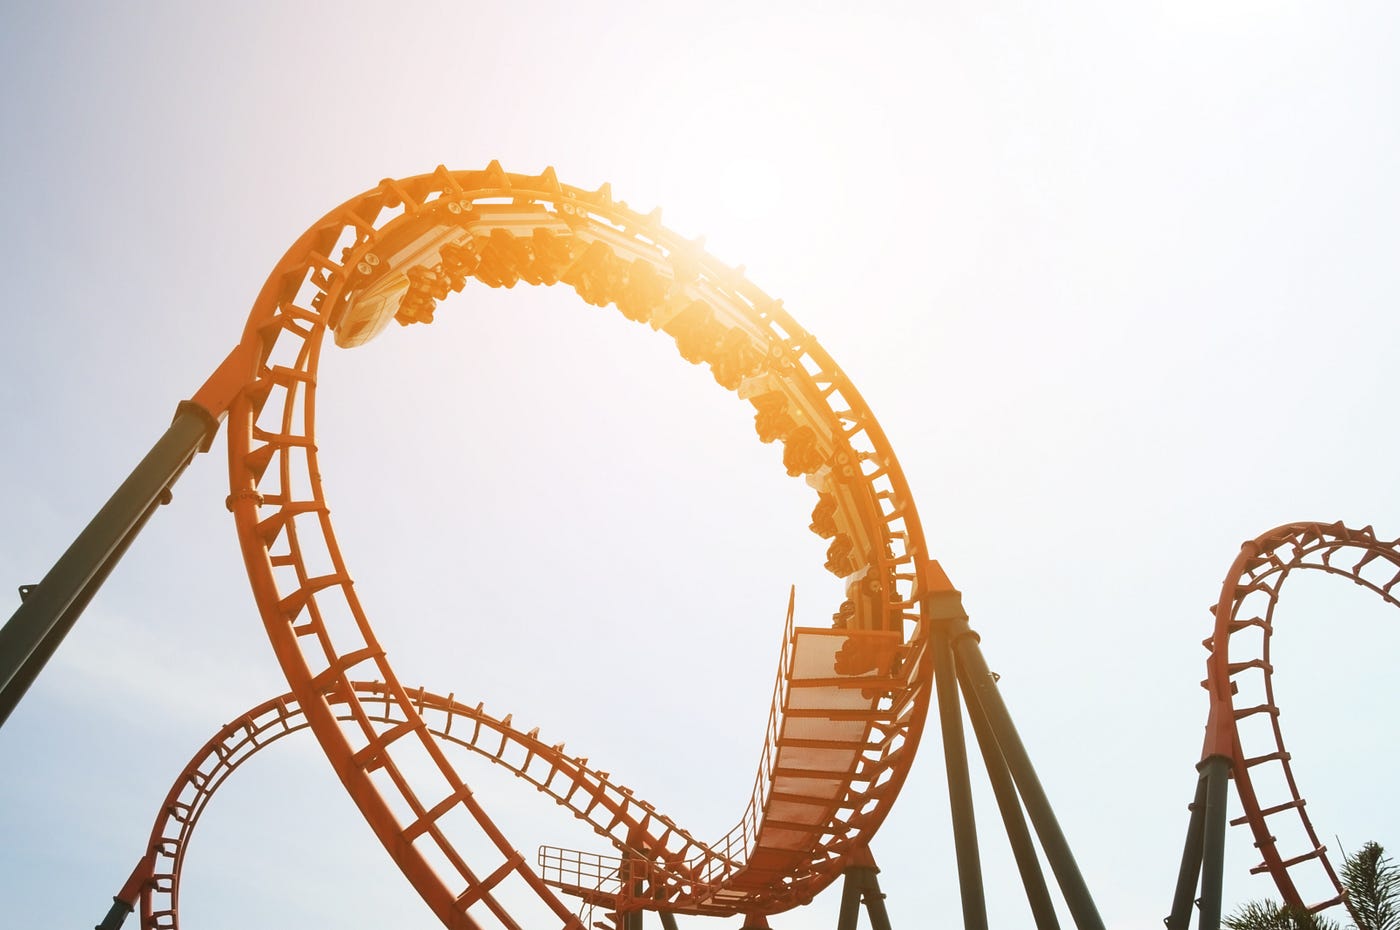 Solved The Roller Coaster Database maintains a web site